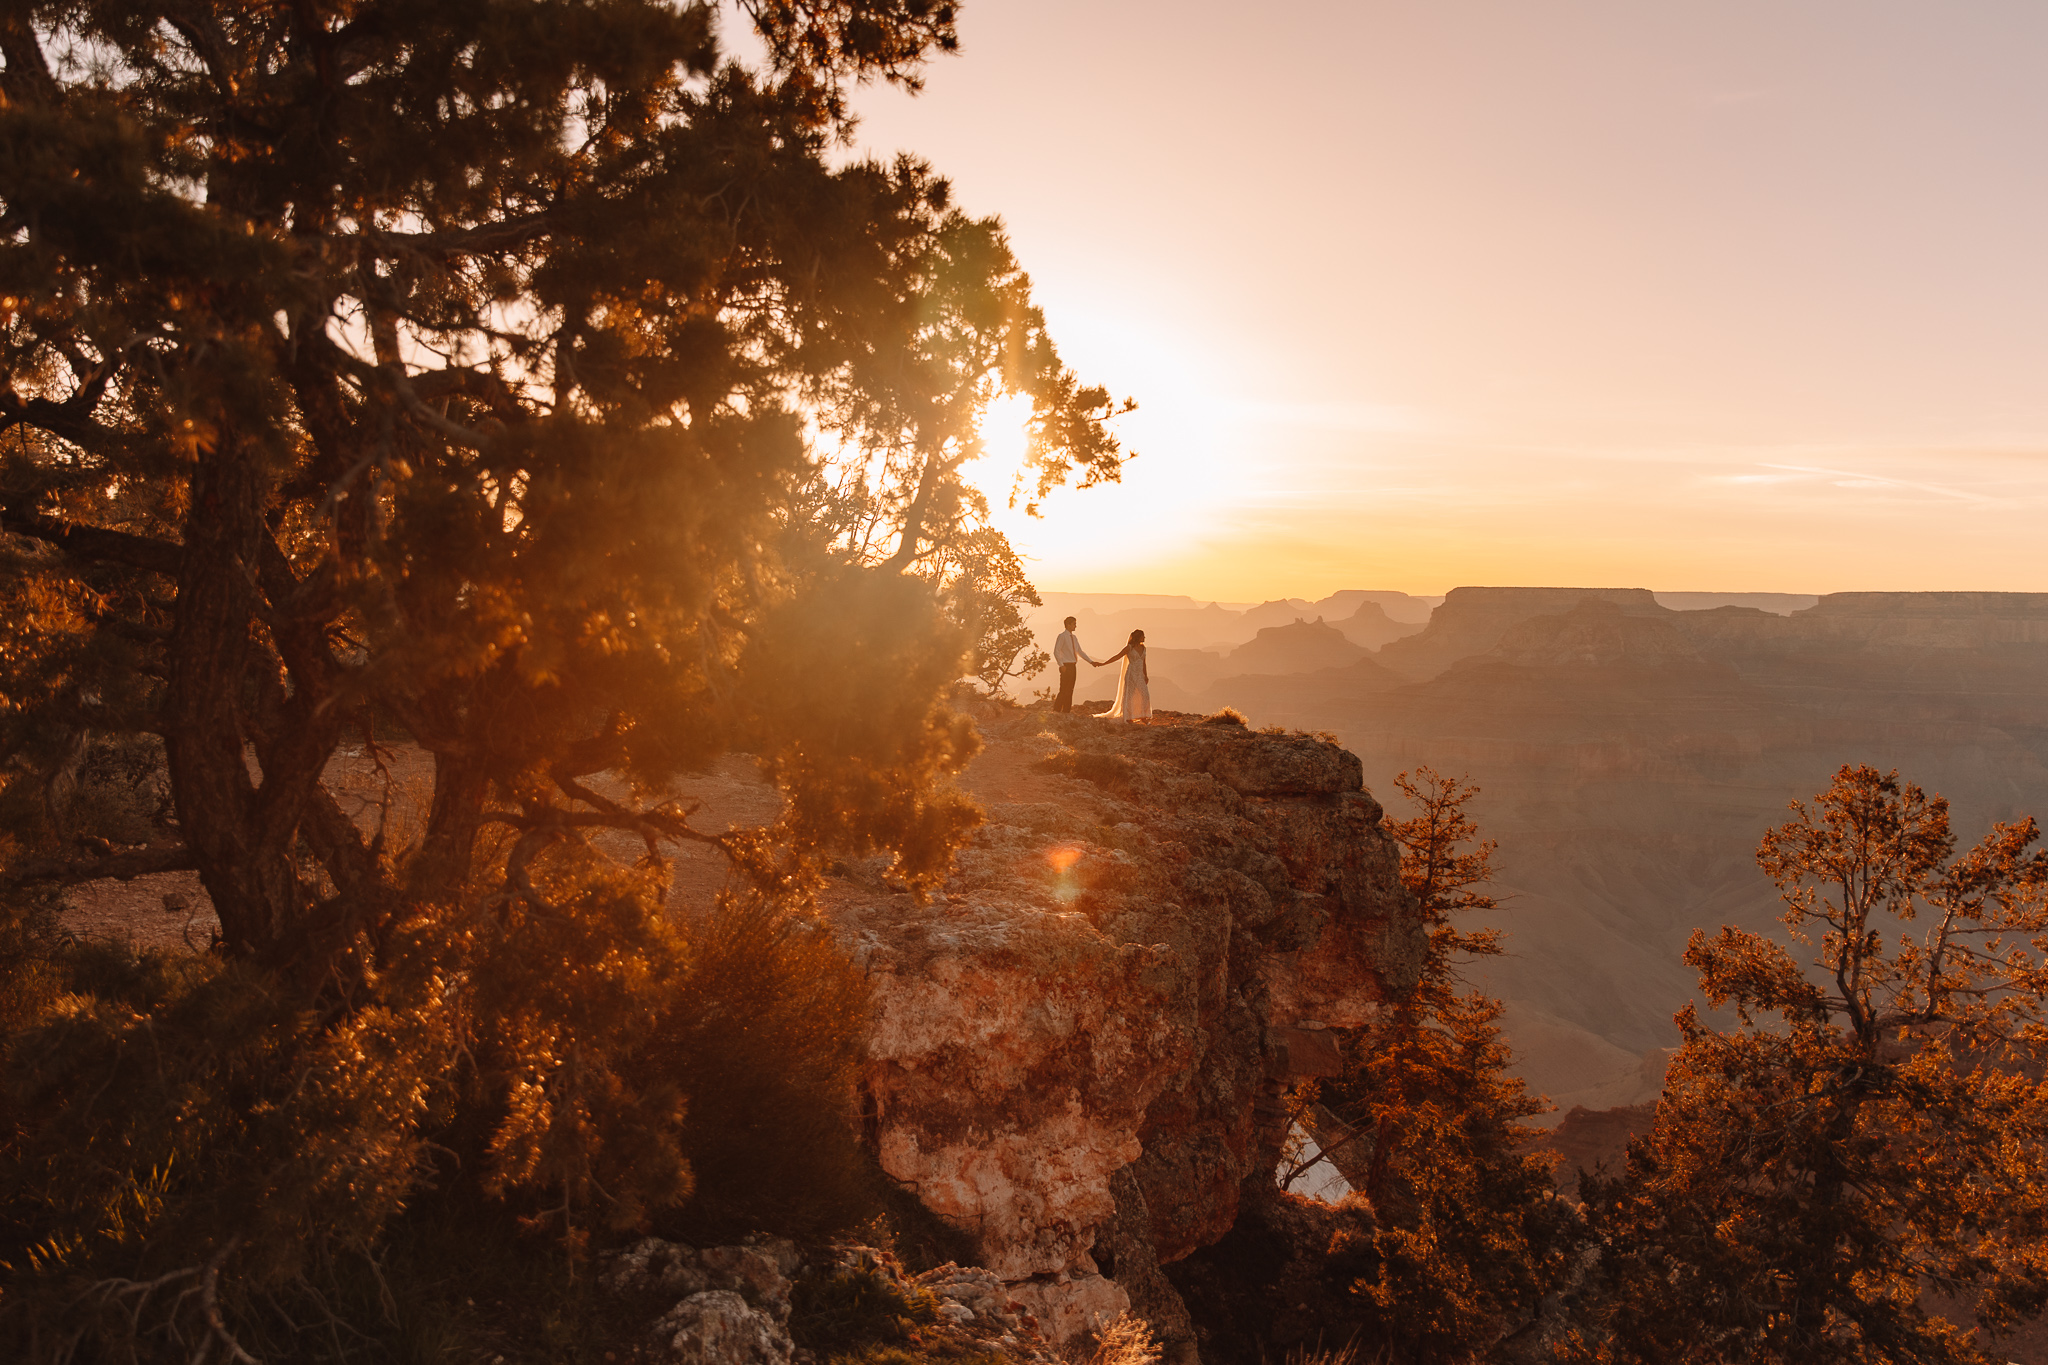 Elopement couple walking on the edge of a cliff in The Grand Canyon